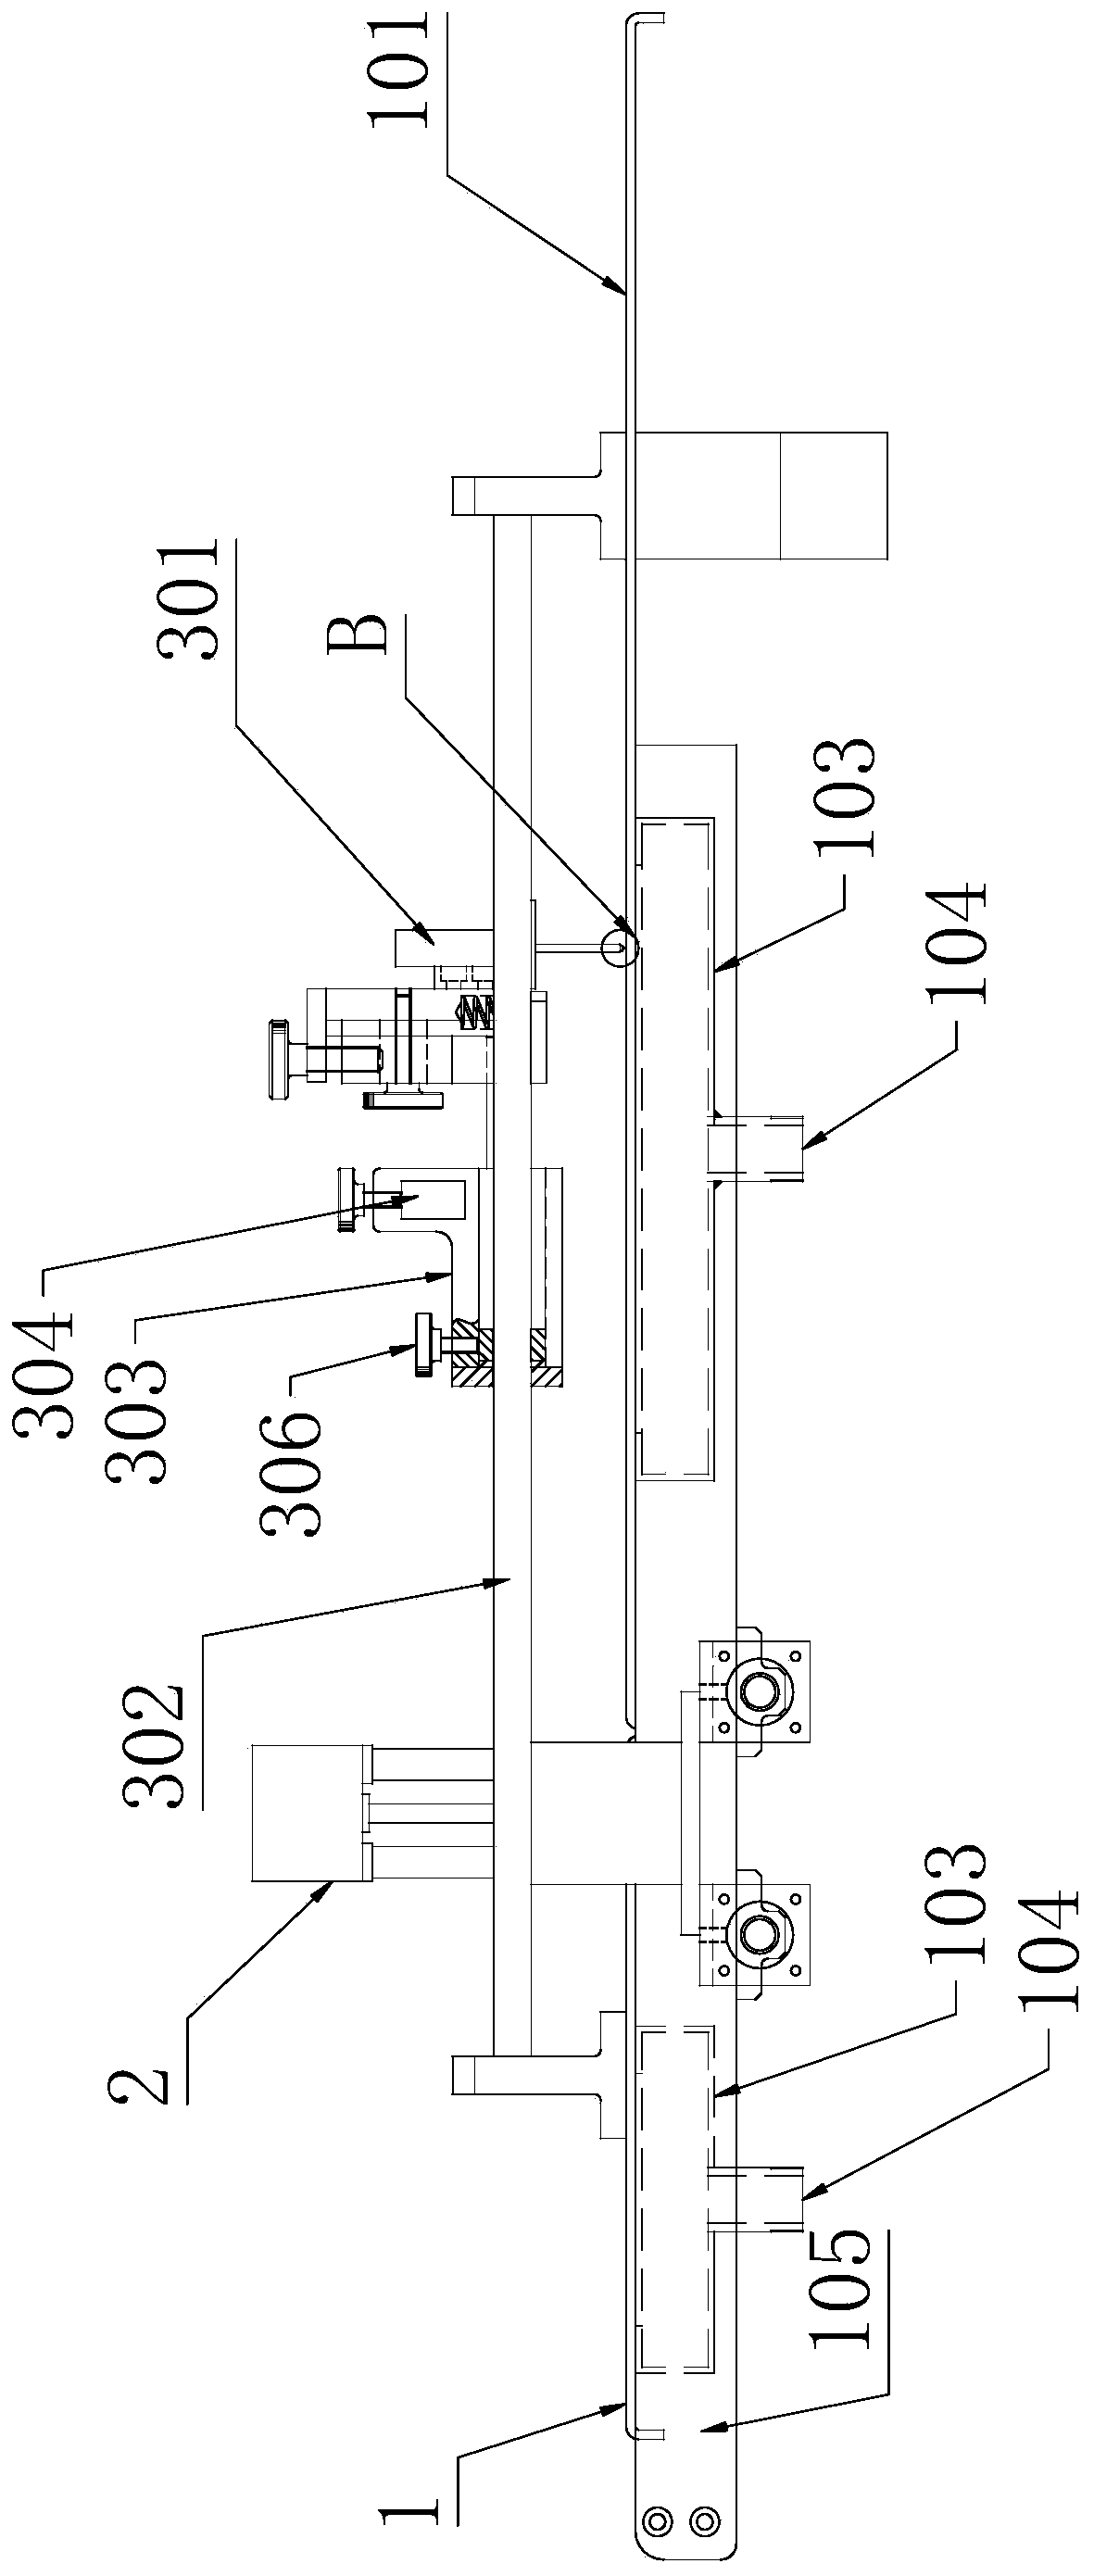 A material feed control device and control method applied to a die-cutting machine